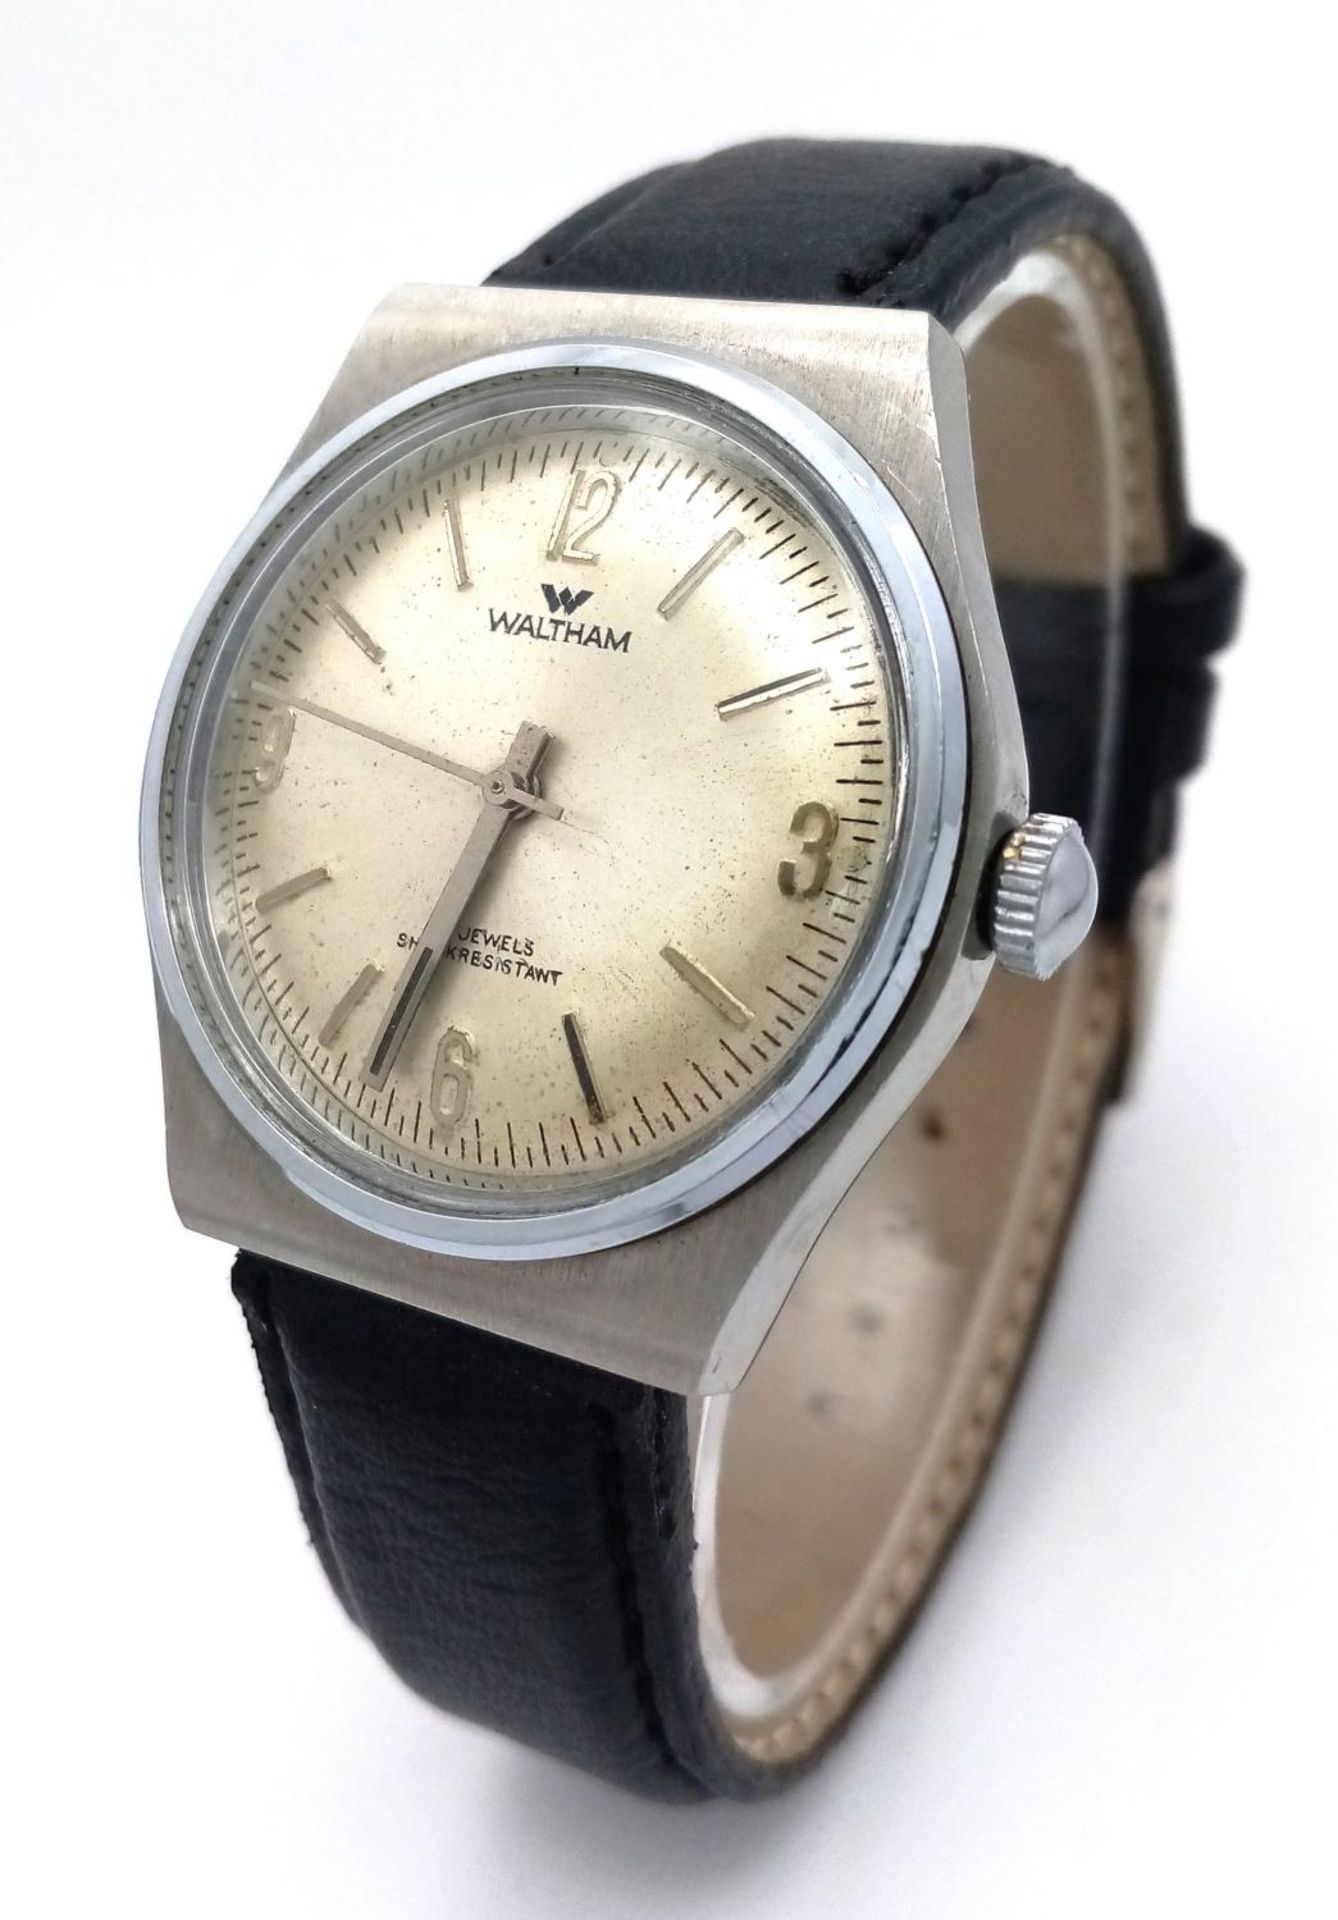 A Vintage Waltham 17 Jewel Automatic Gents Watch. Black leather strap. Stainless steel case - - Image 2 of 6